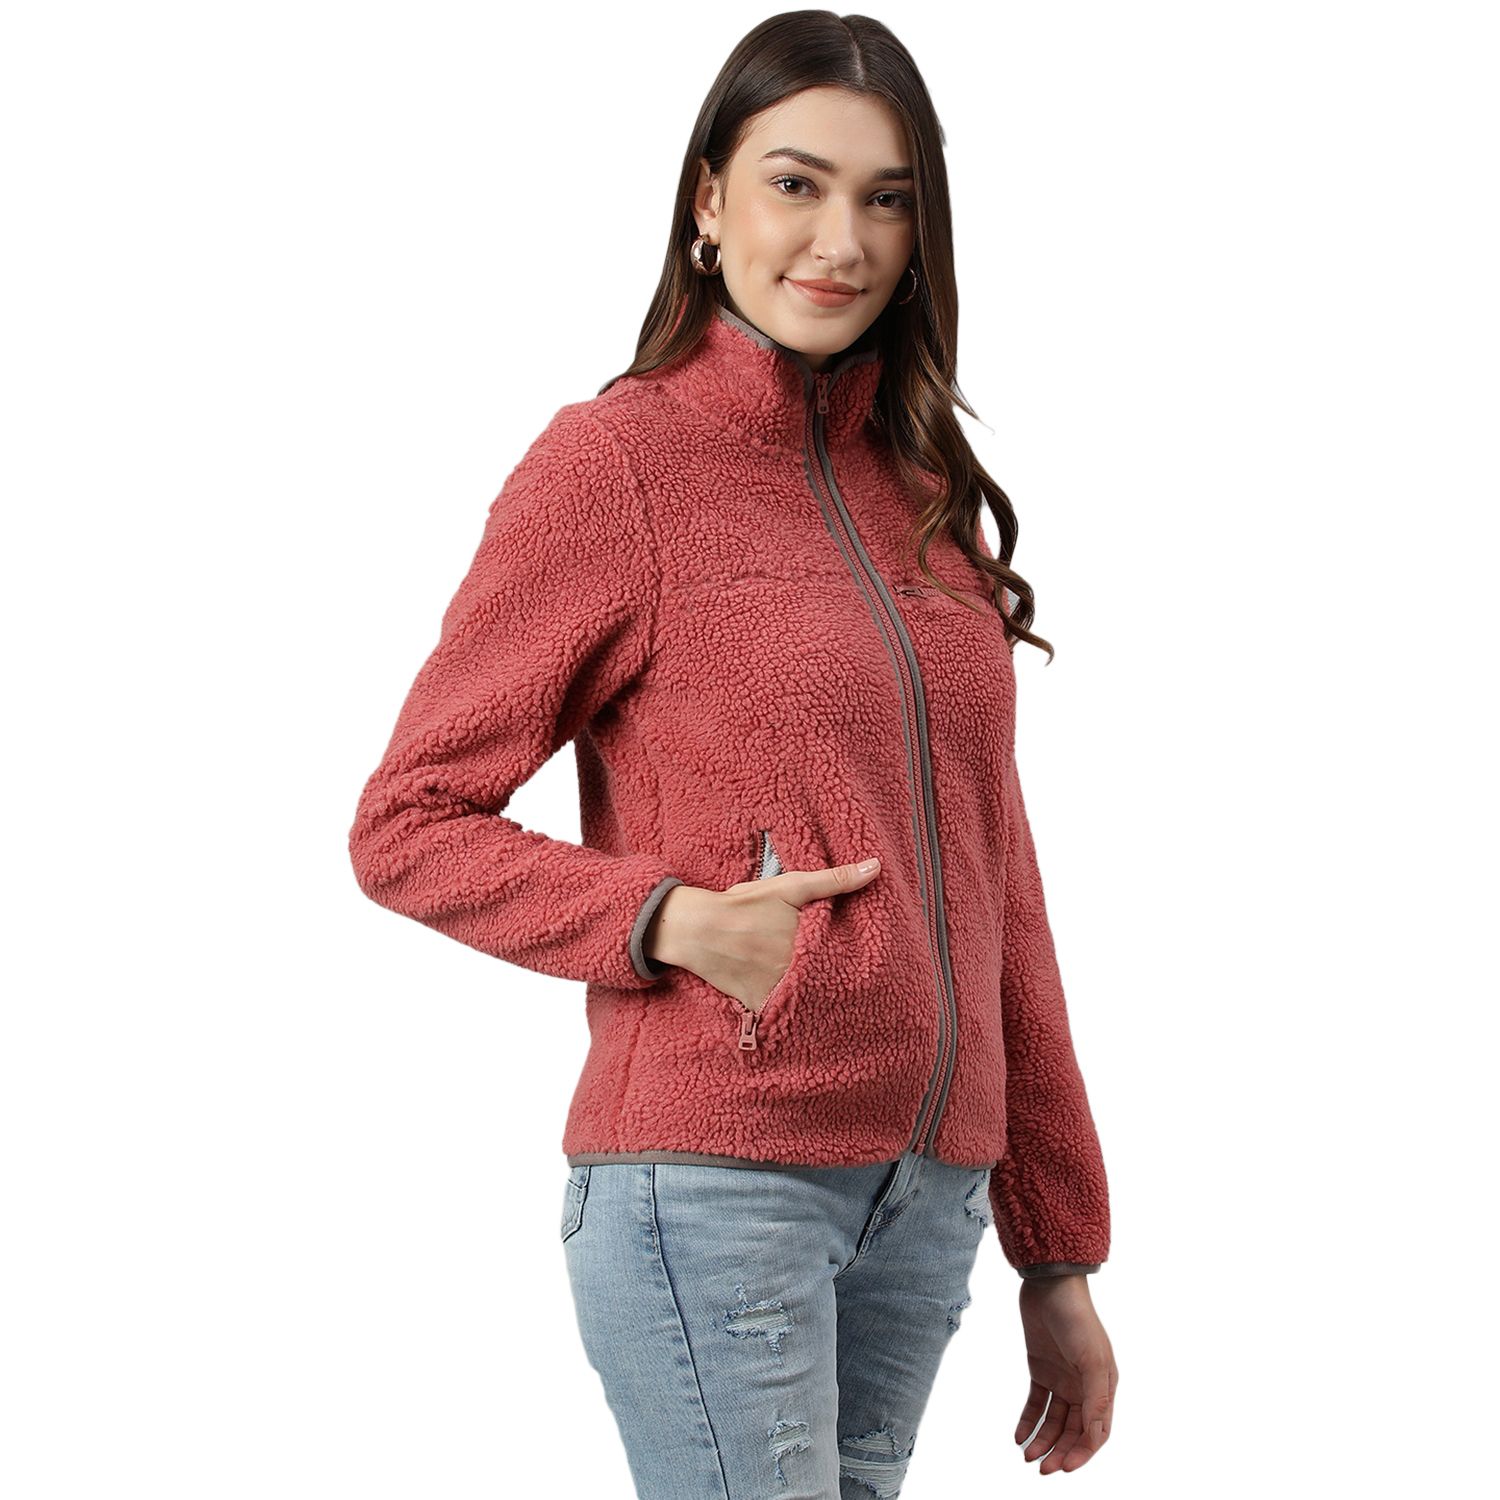 faded rose sweatshirt for women 3 597 mrp 5 995 40 % off prices include ...